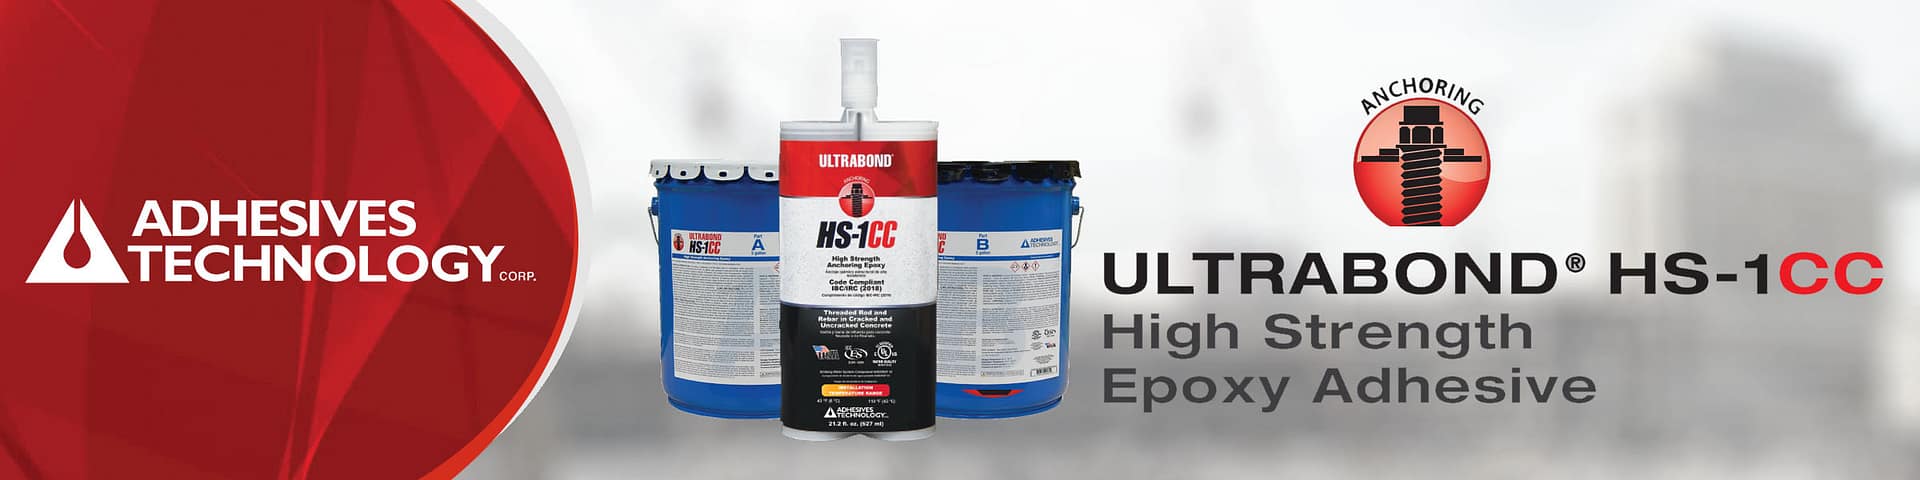 Adhesives Technology Corp. HS-1CC